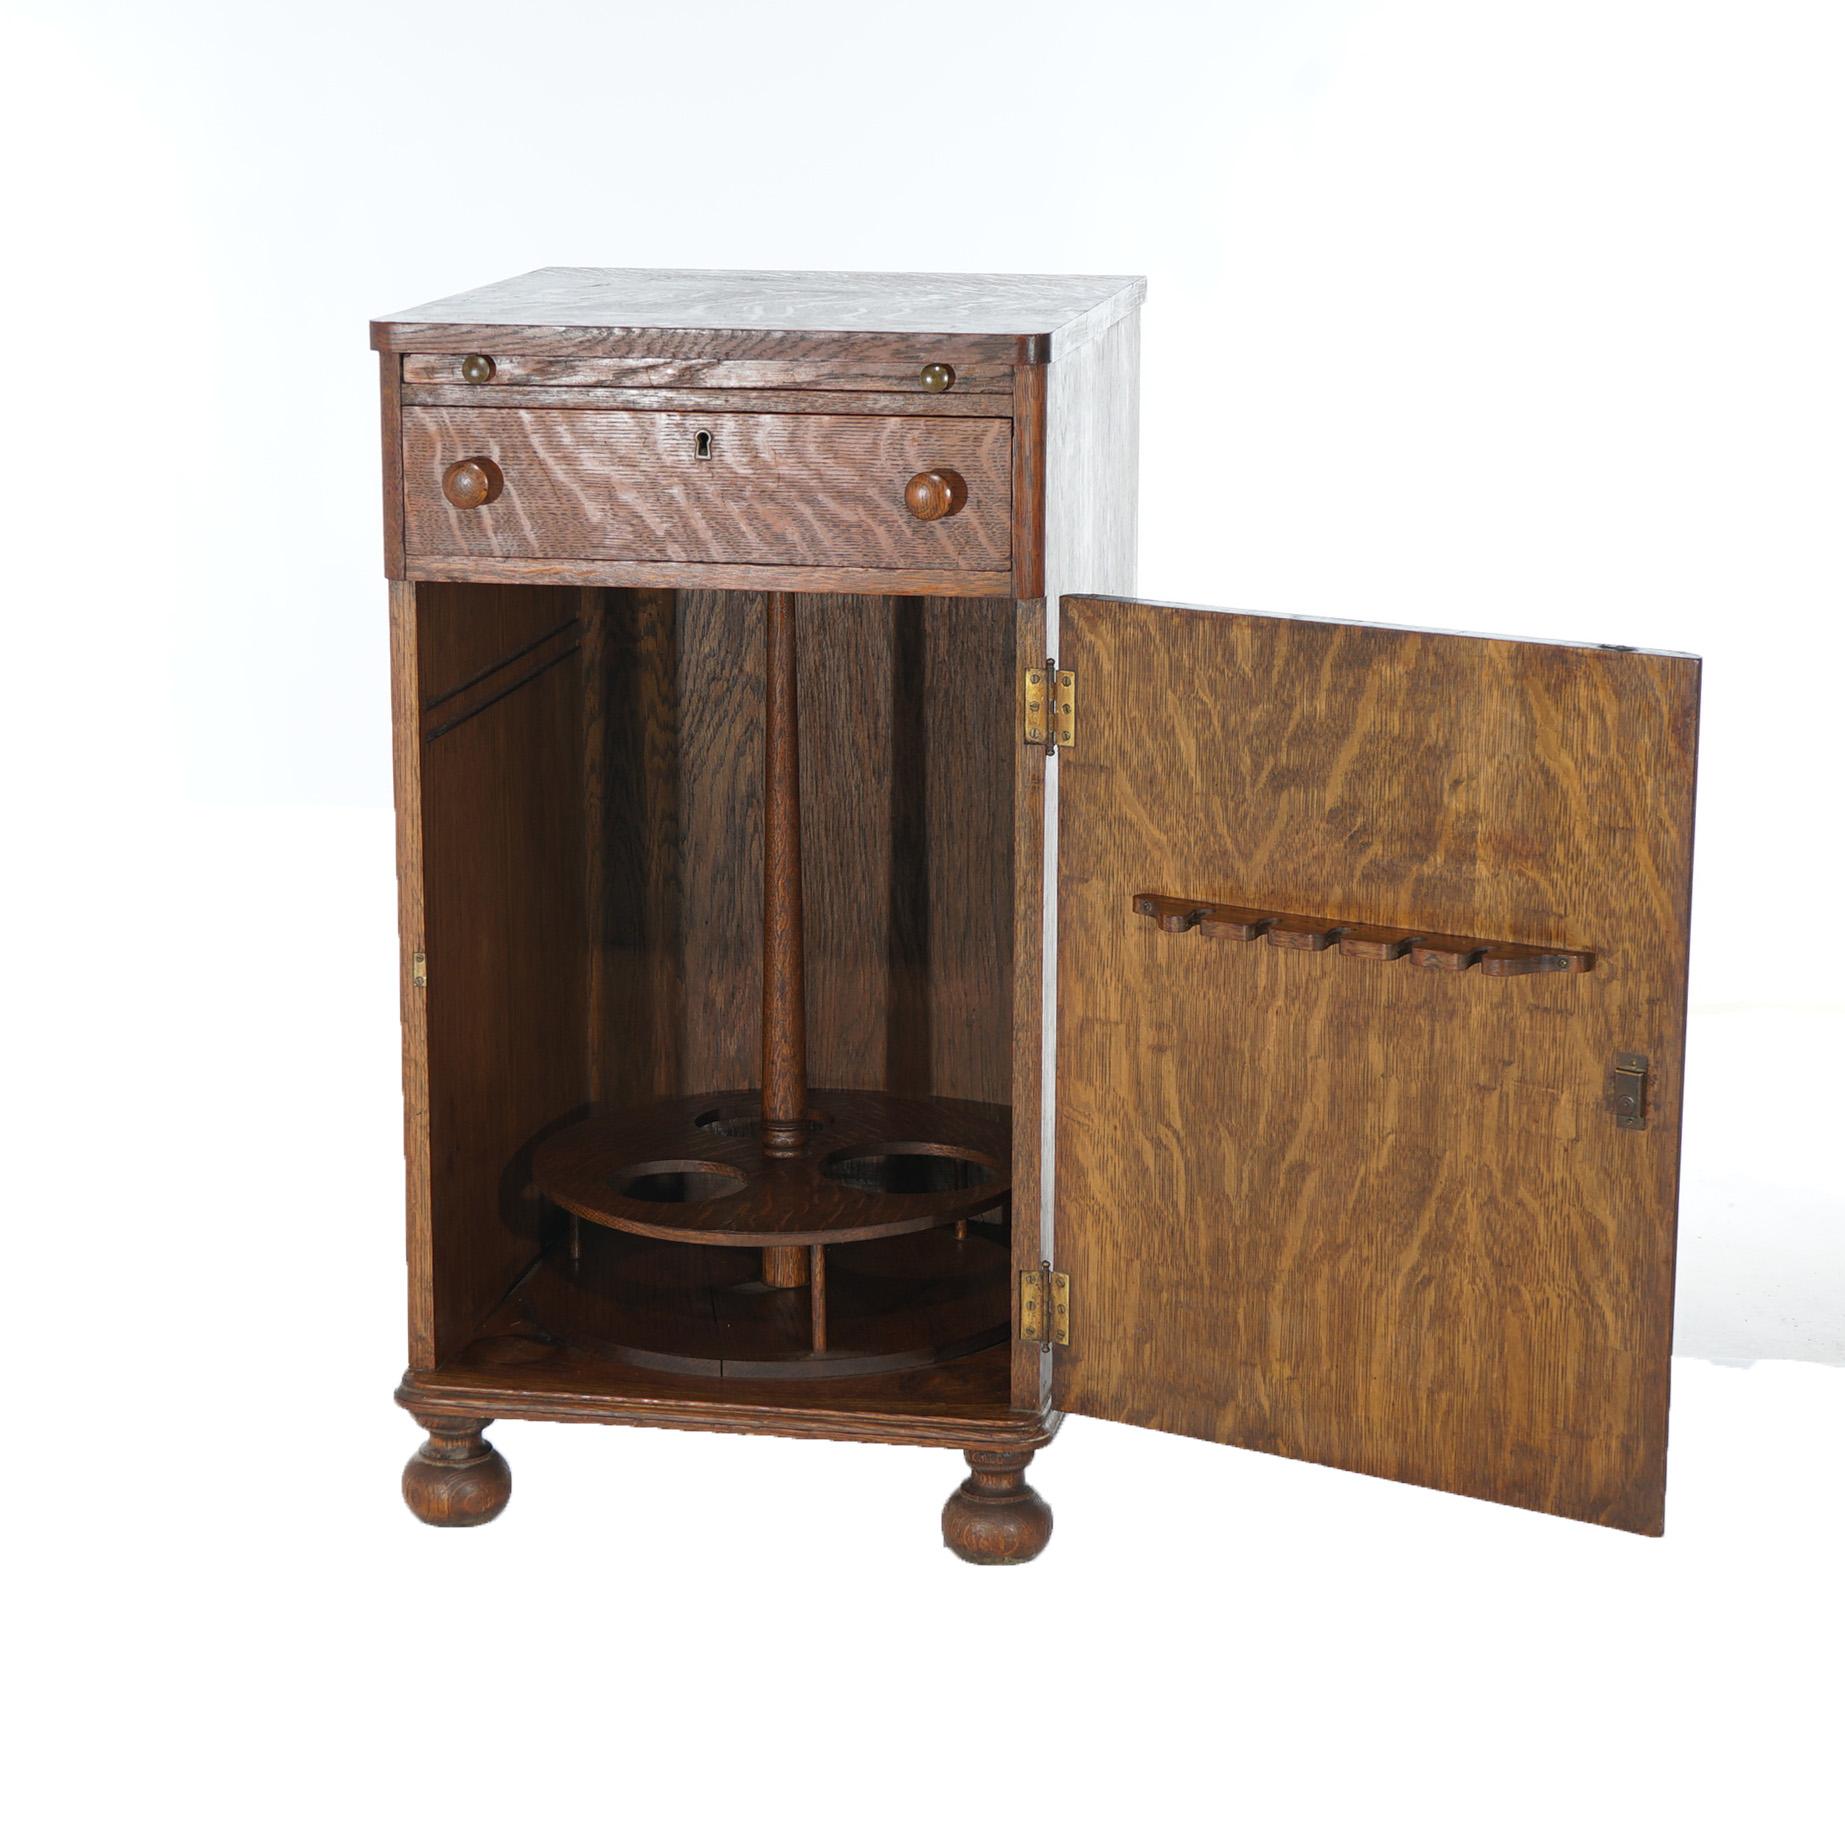 An antique cellarette offers quarter sawn oak construction with pullout mixing tray over single drawer and door opening to lazy Suzanne bottle 
 shelf, c1910

Measures- 34''H x 18.5''W x 19''D